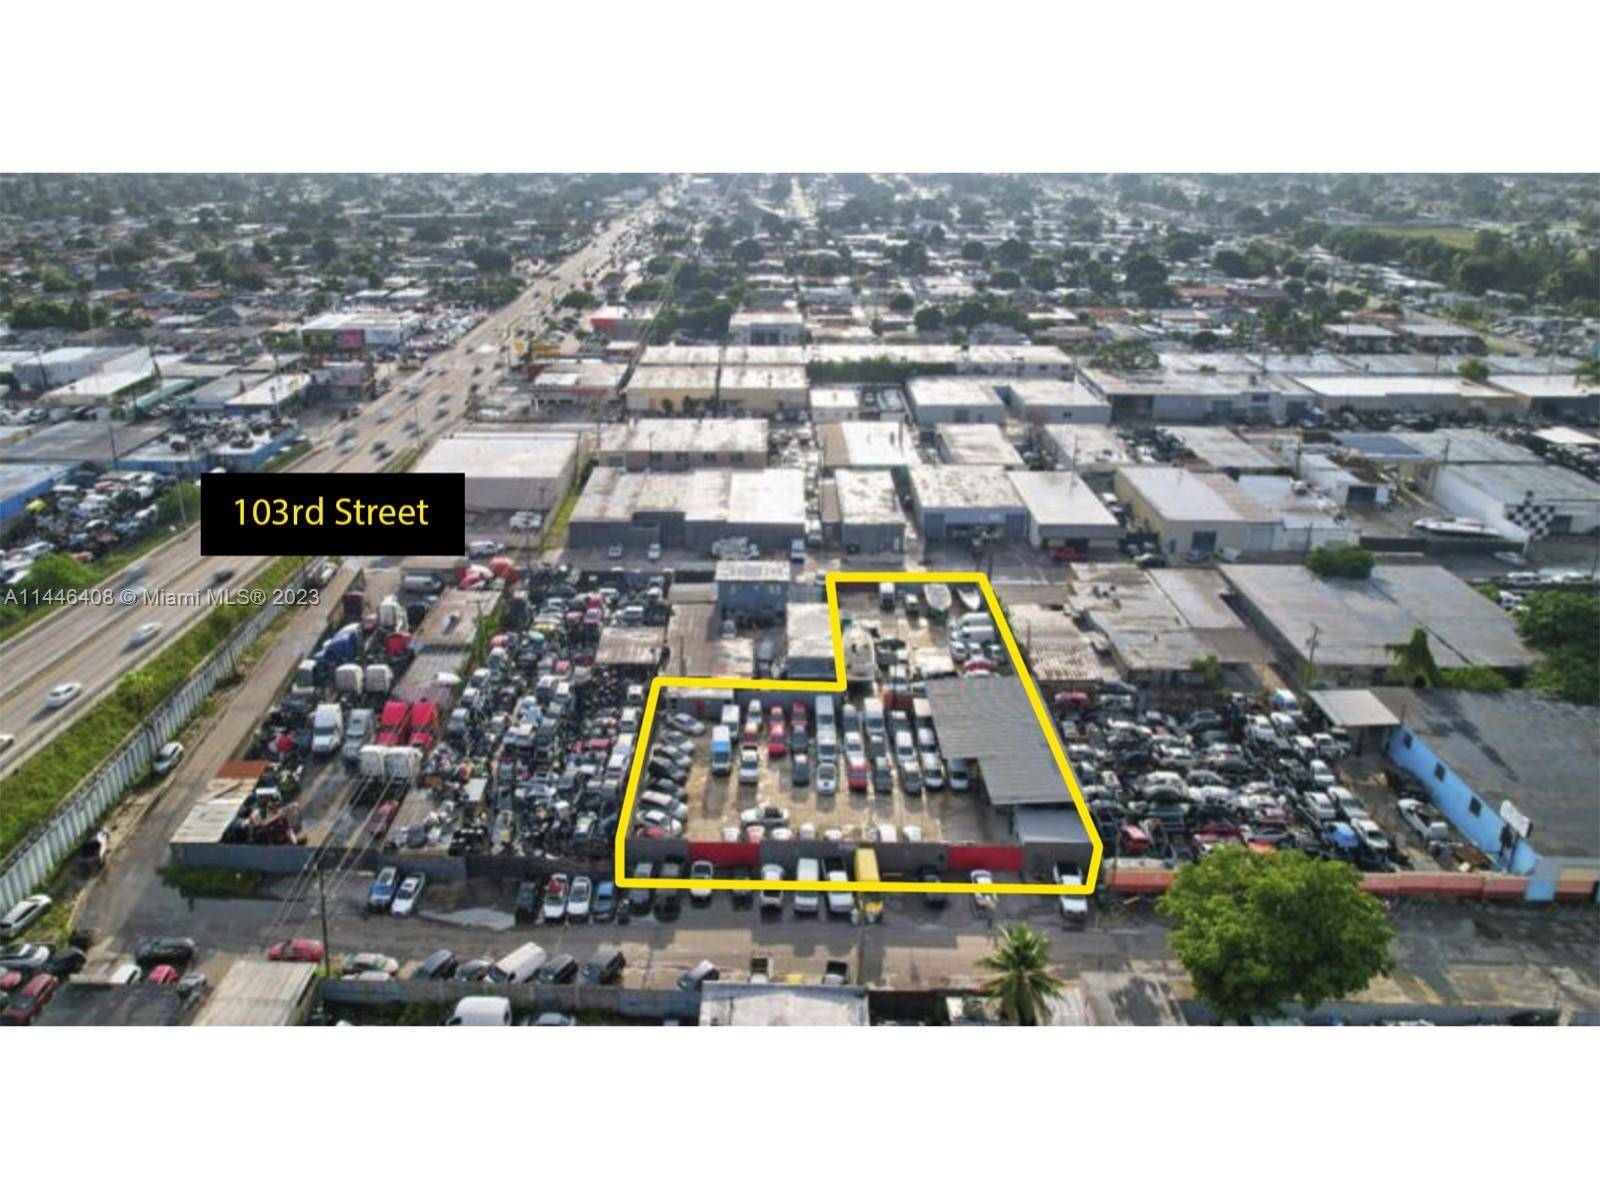 The property is presently used as a used car sales lot.